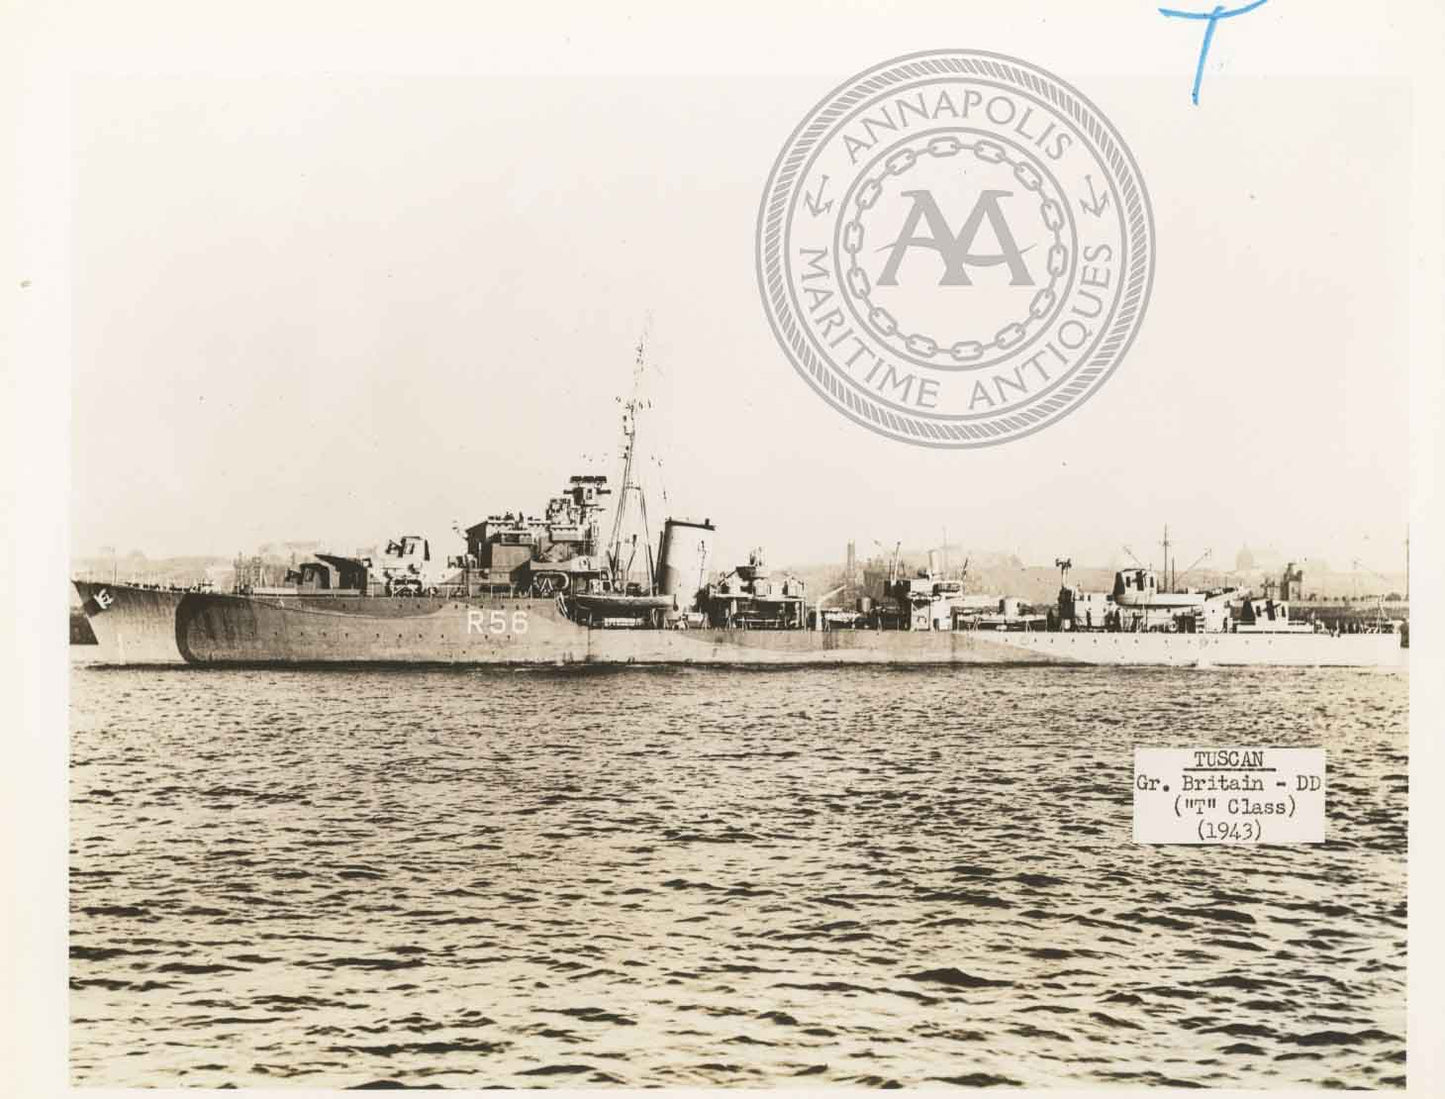 British and Canadian "T" Class Destroyers